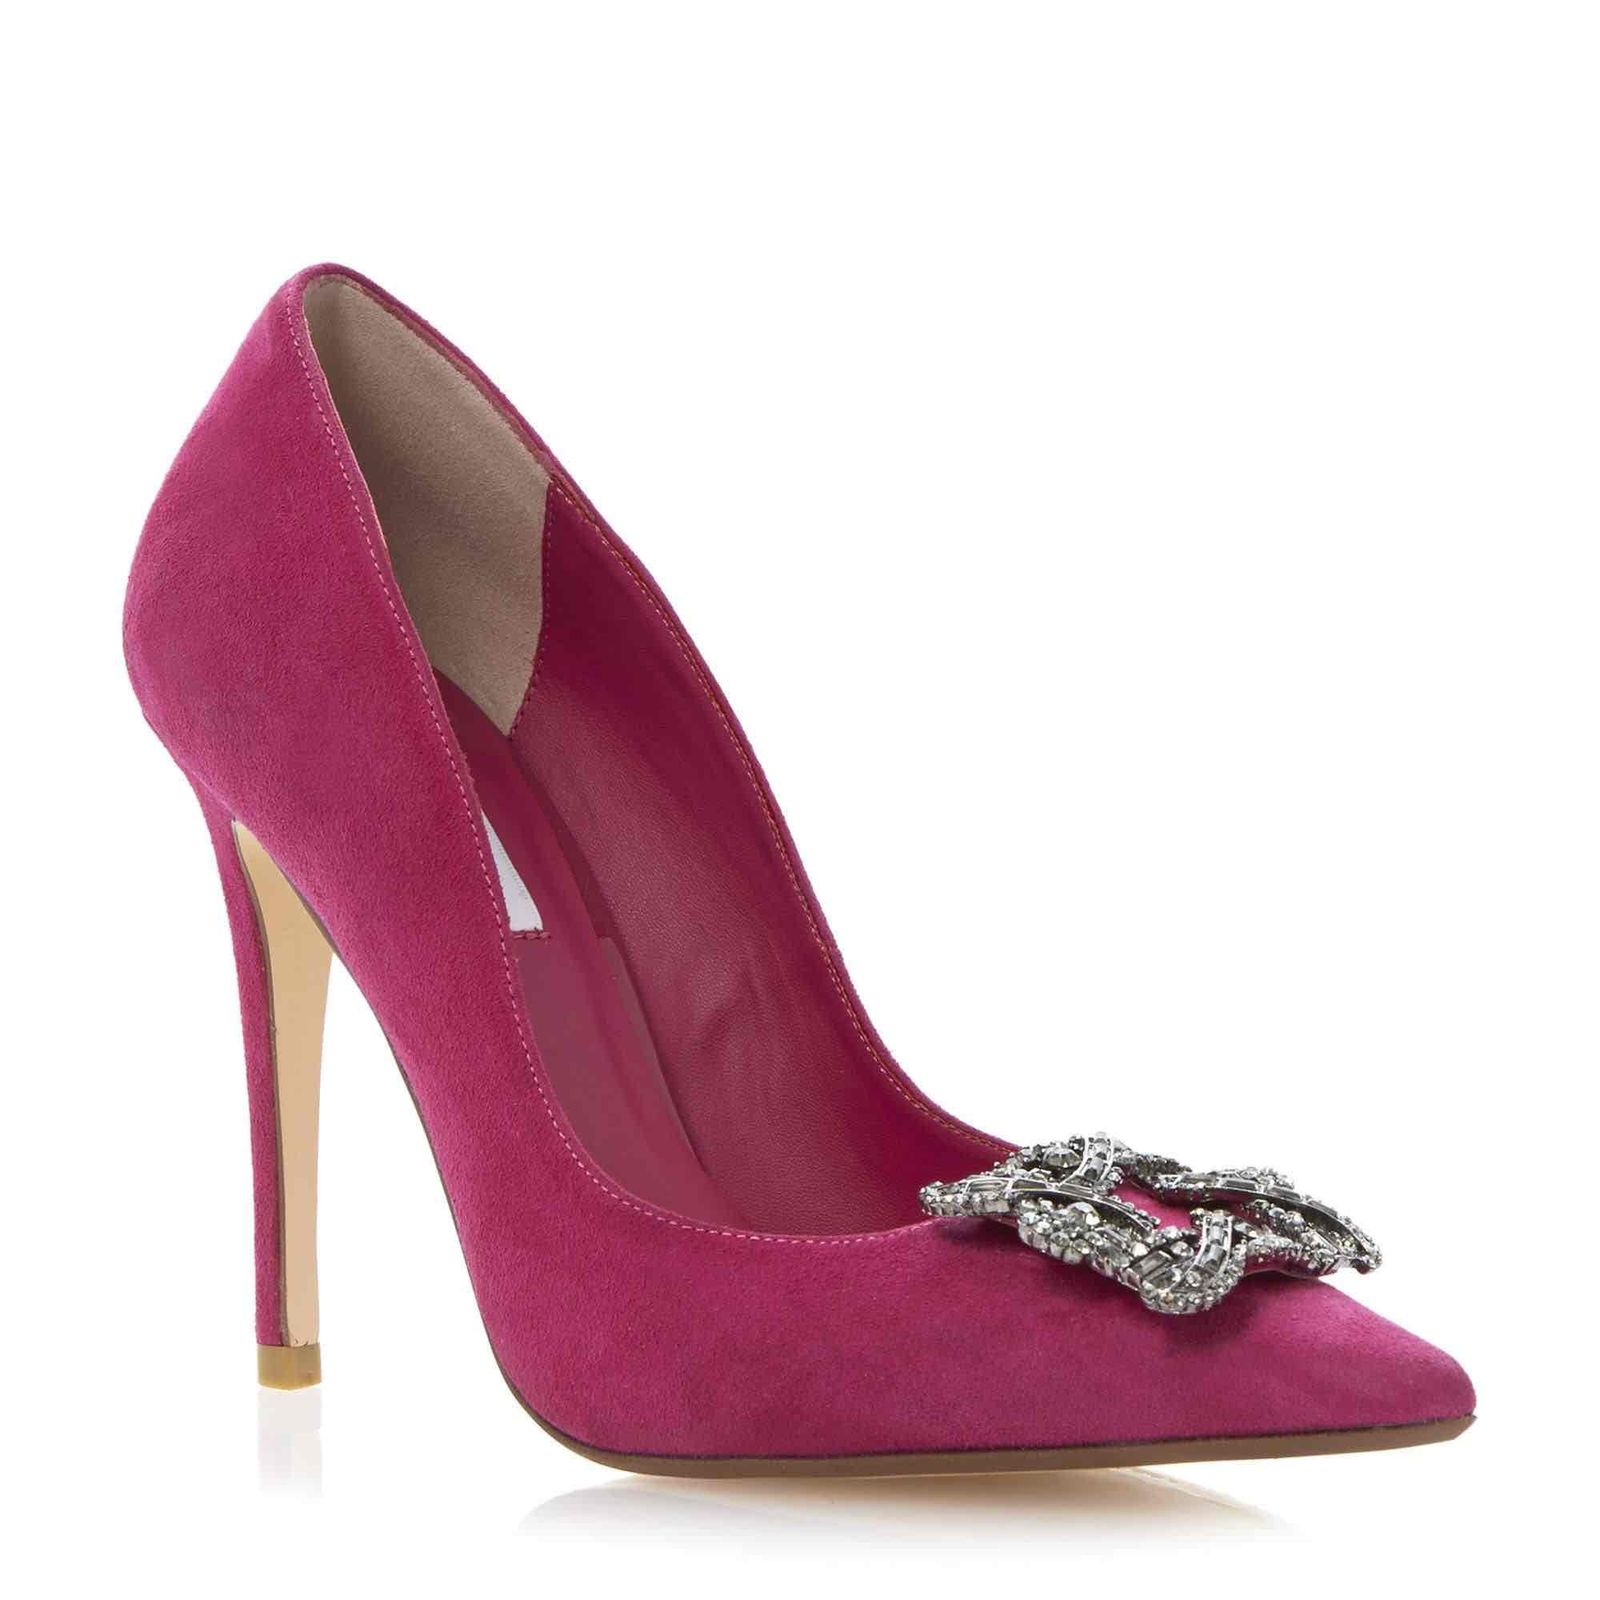 Dune Breanna Jewelled Brooch Court Shoes | Dune shoes, Court shoes, Shoes